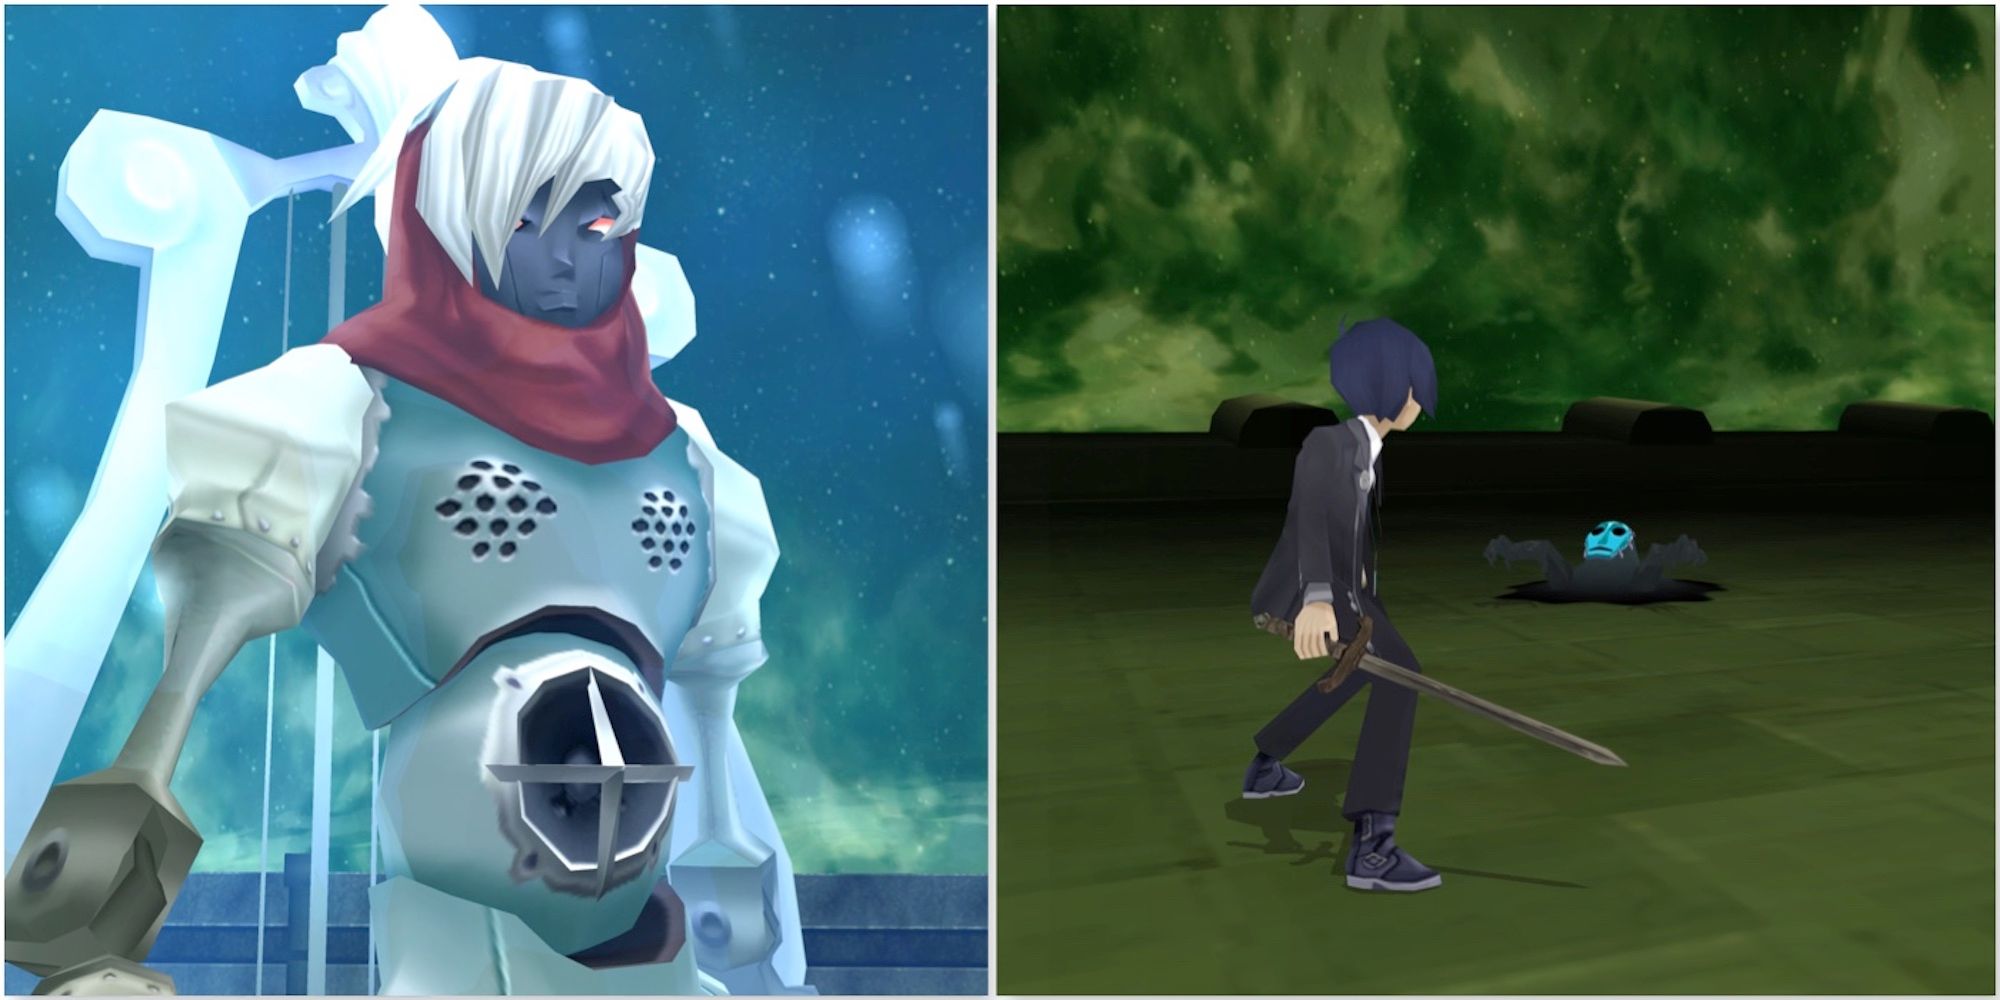 Orpheus and fighting enemies in Persona 3